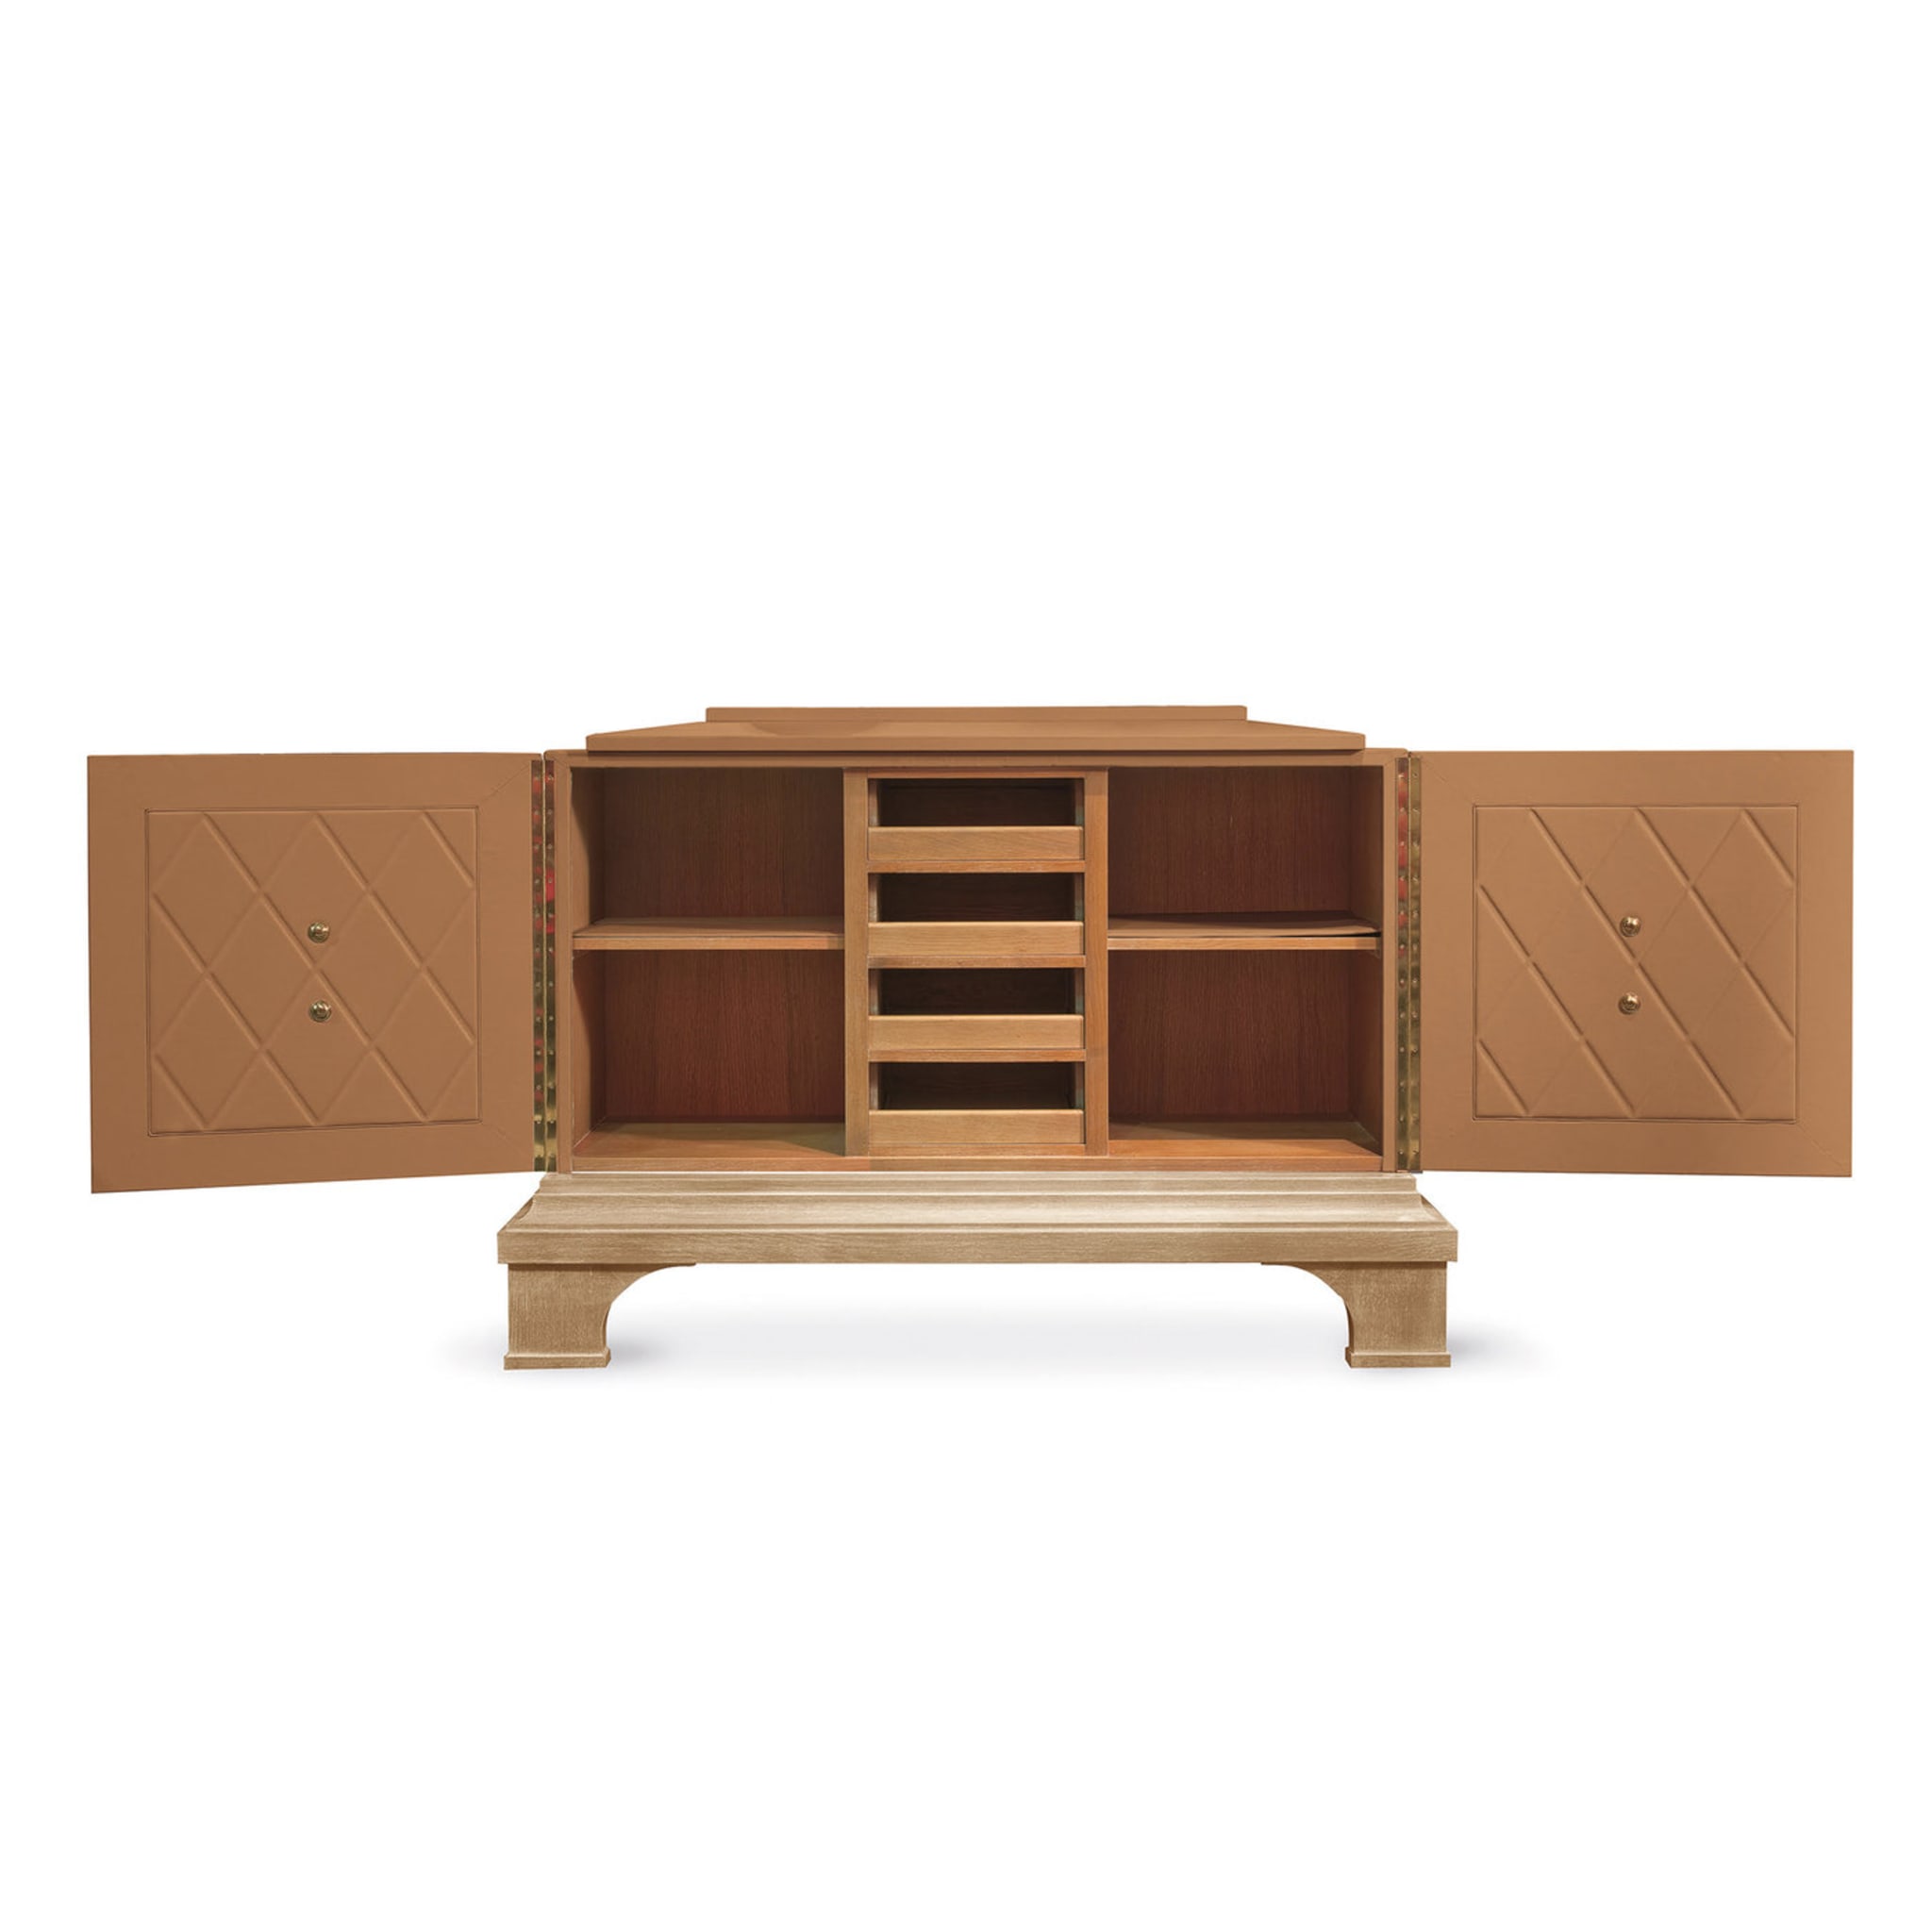 Faubourg Sideboard - Alternative view 1